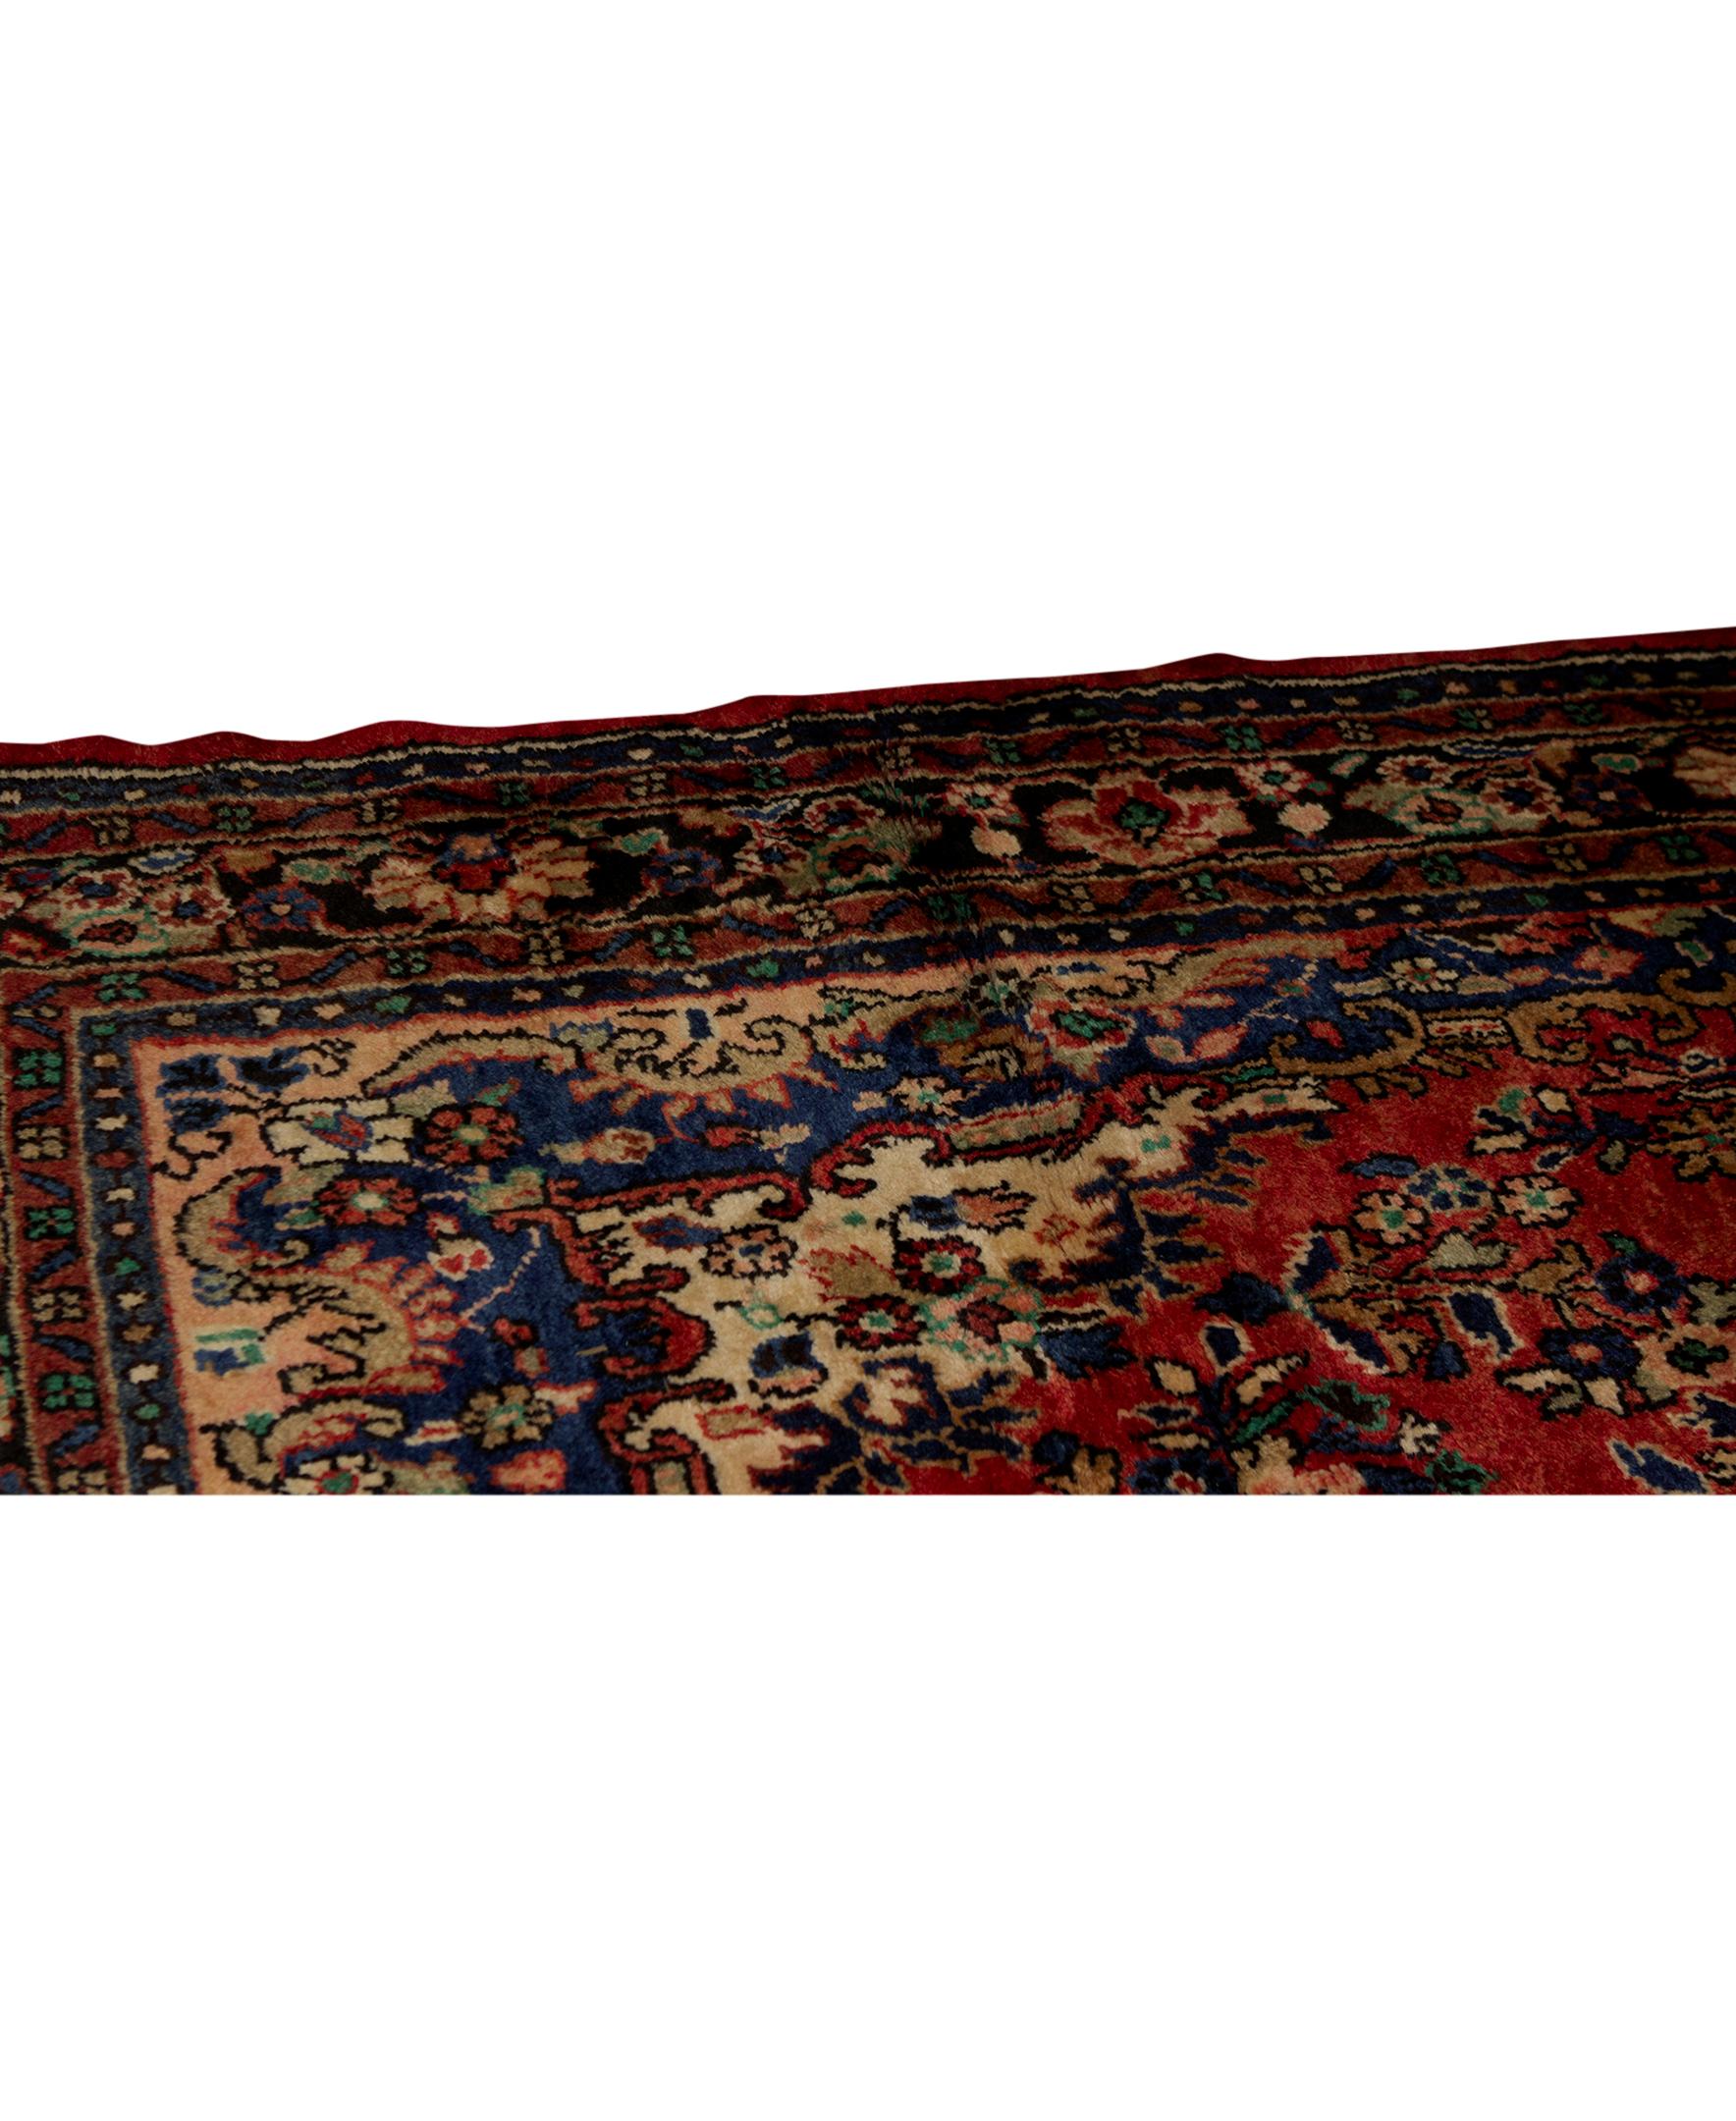   Antique Persian Fine Traditional Handwoven Luxury Wool Red / Navy Rug. Size: 6'-11